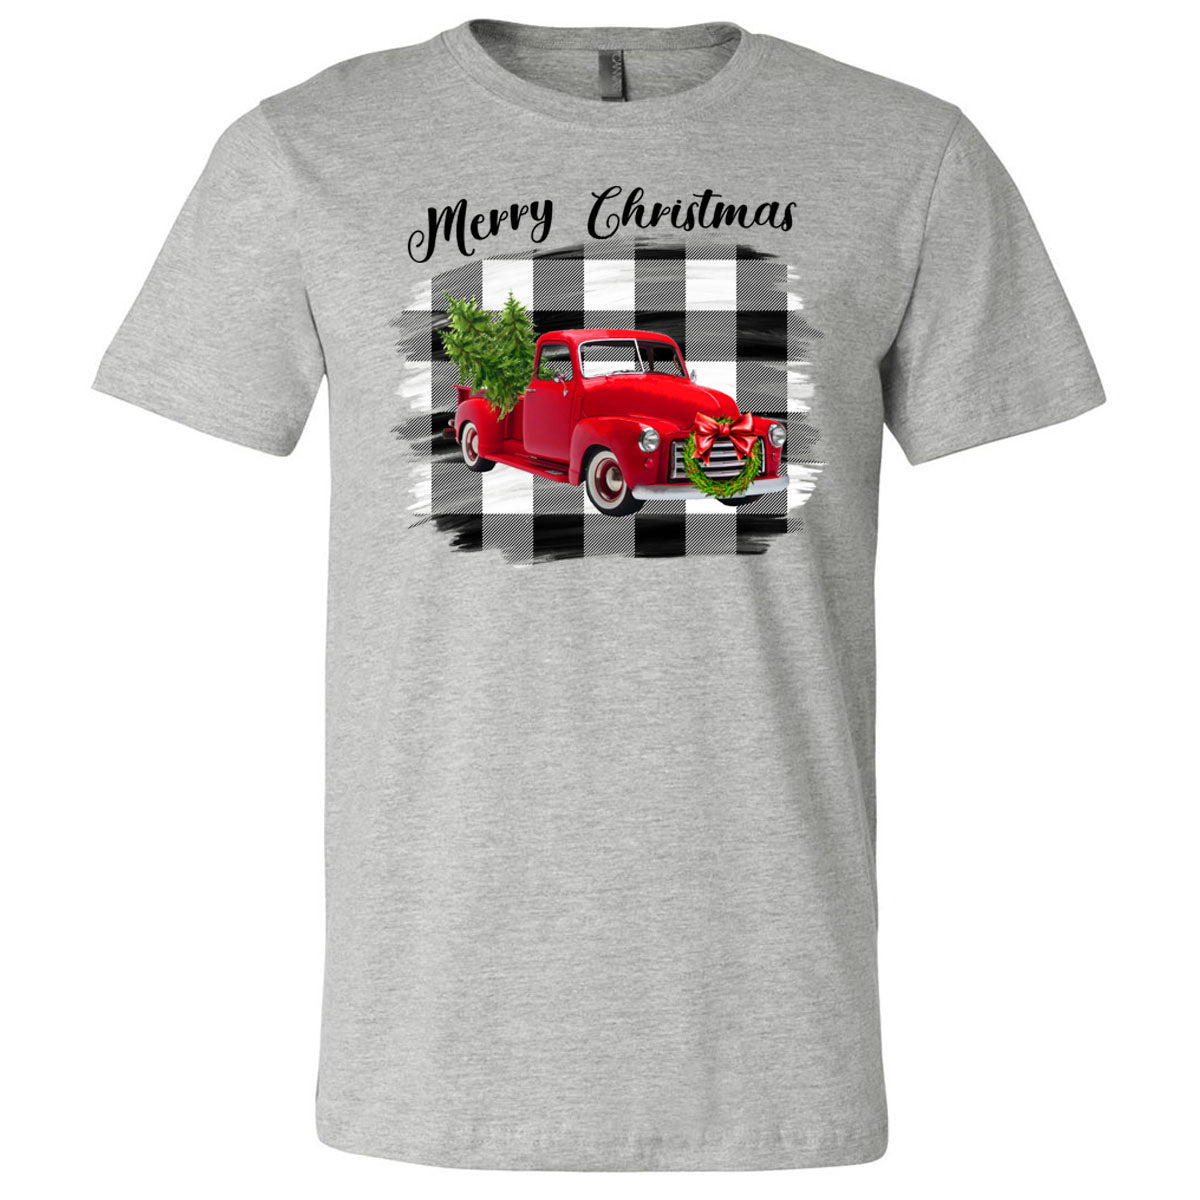 Merry Christmas Red Truck Black White Plaid Background Tee - Southern Grace Creations